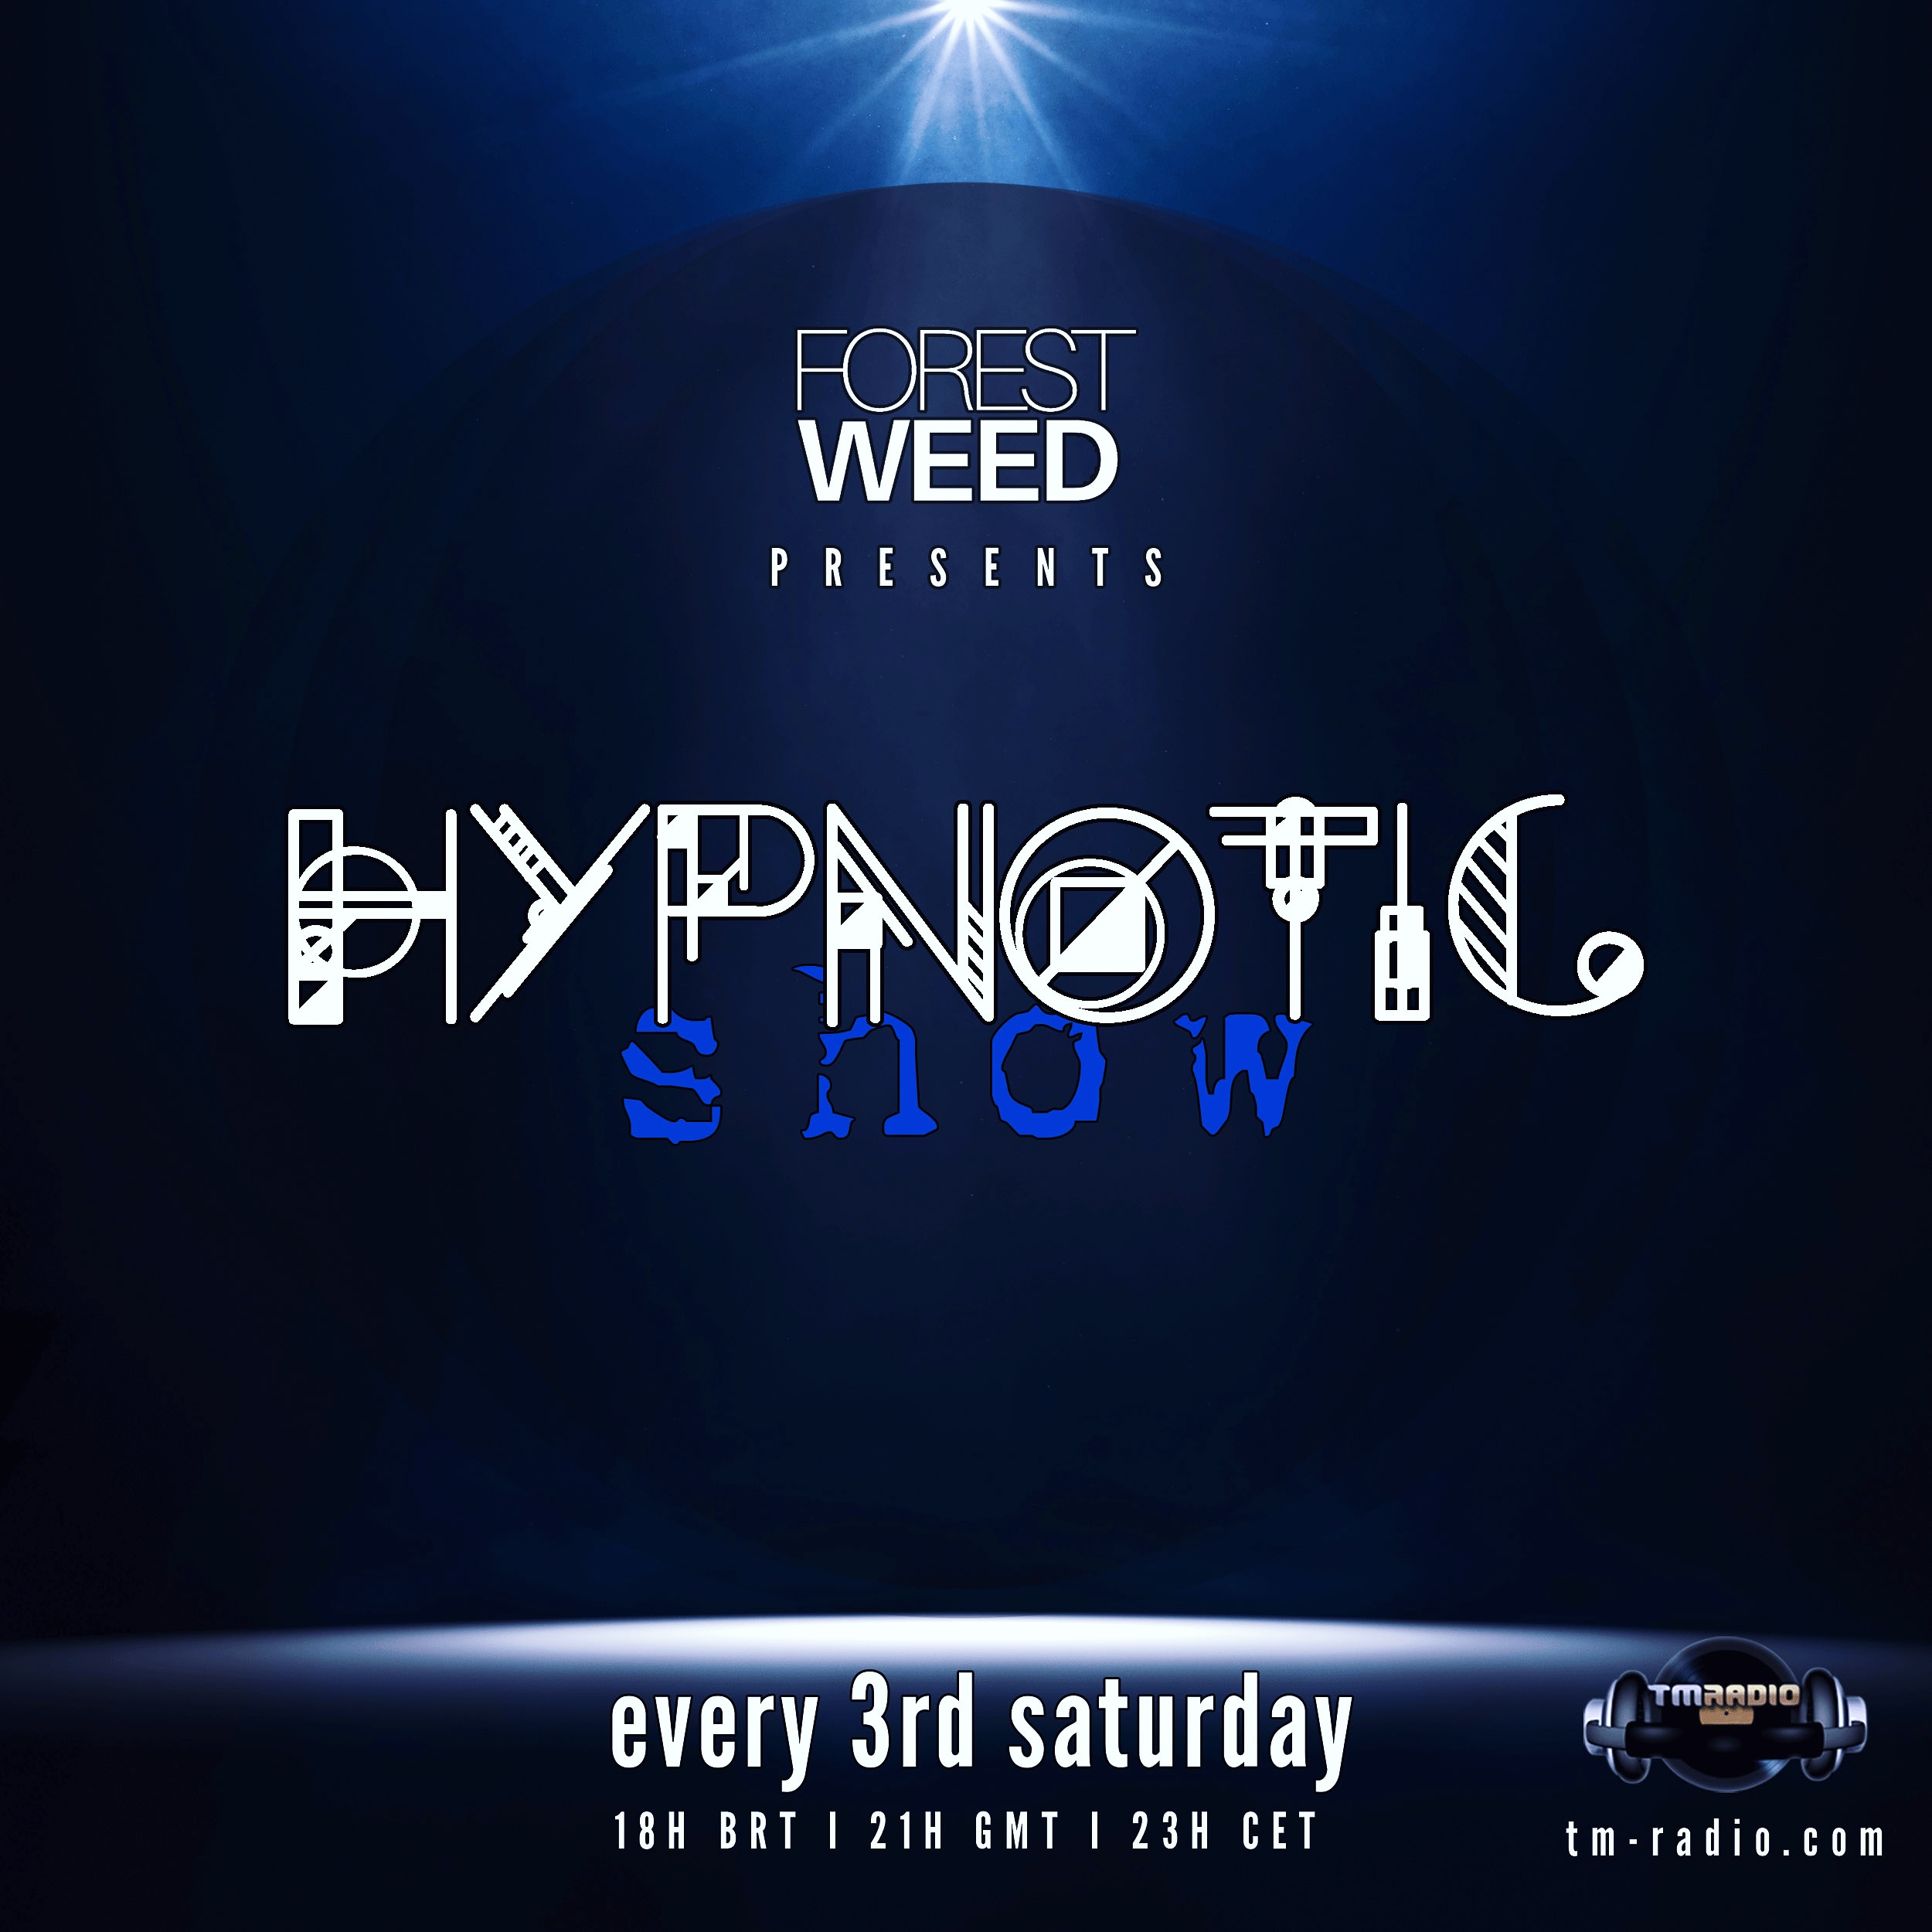 HYPNOTIC Show :: [REPLAY] Forest Weed - Hypnotic Show Ep04.Part1 - Host Mix Sept.2020.mp3 (aired on July 17th, 2021) banner logo